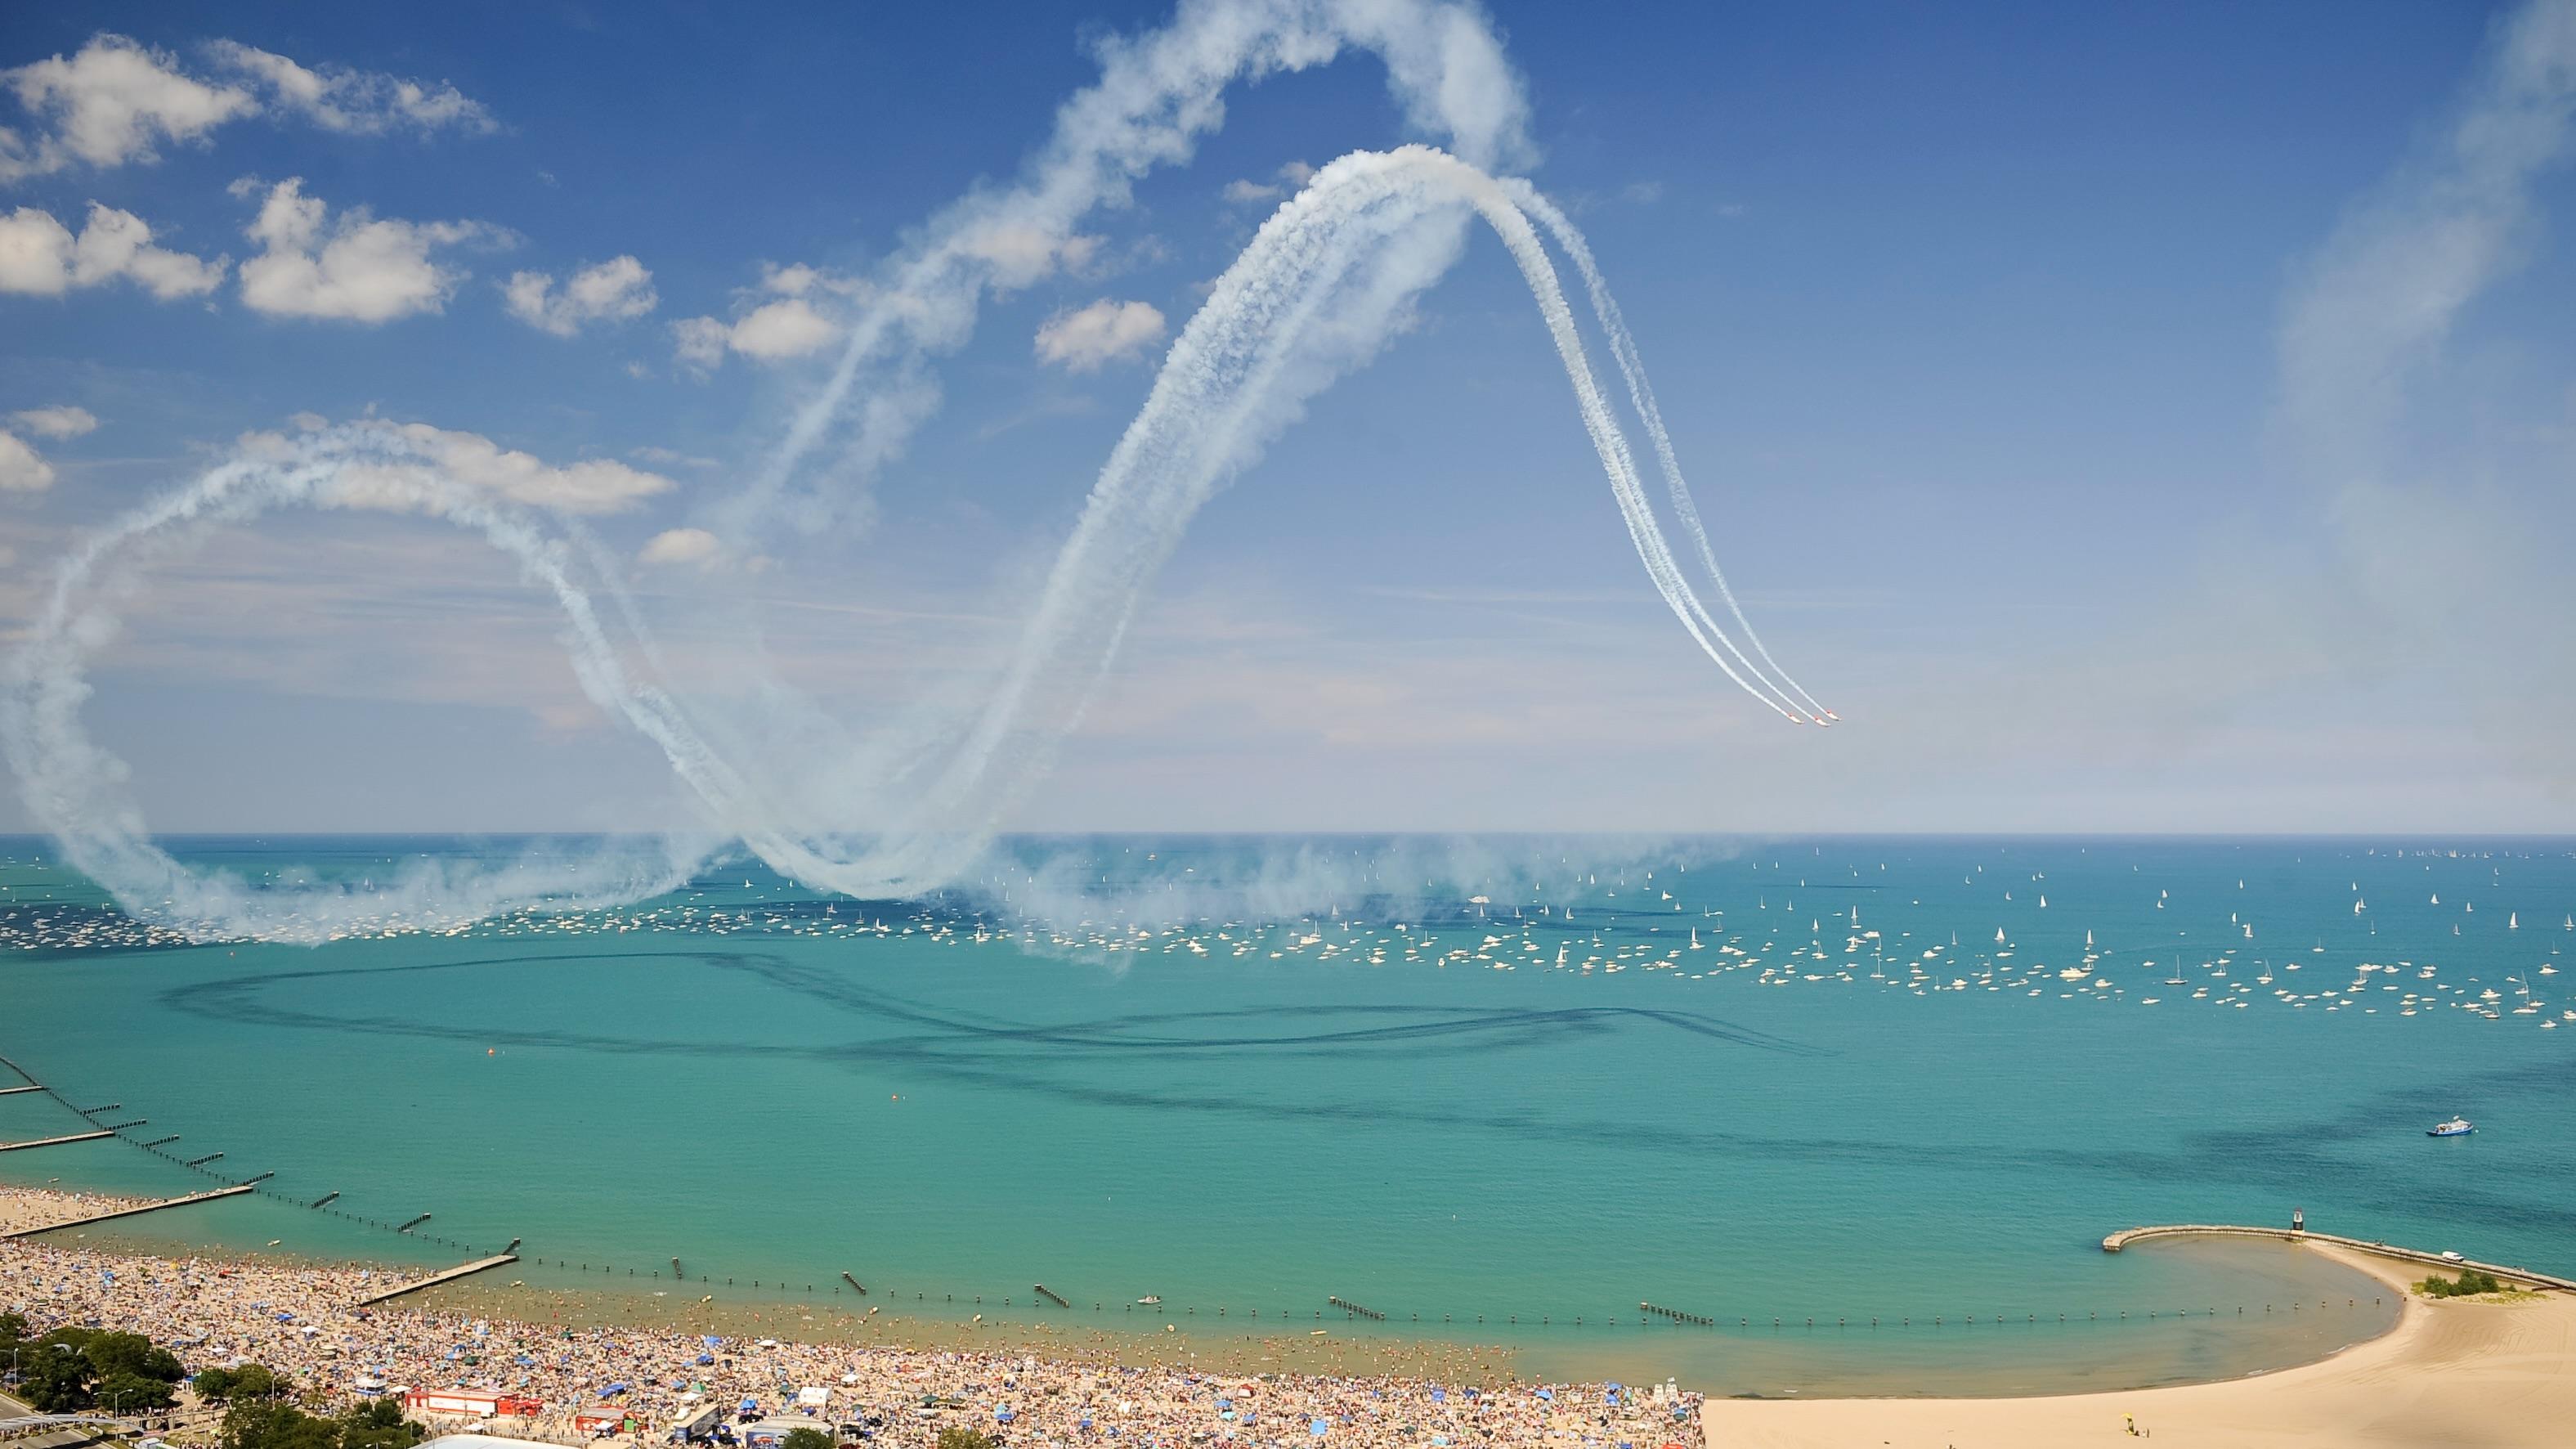 The Chicago Air and Water Show is set to return after a two-year hiatus on Aug. 20 and Aug. 21. (Courtesy Department of Cultural Affairs and Special Events)